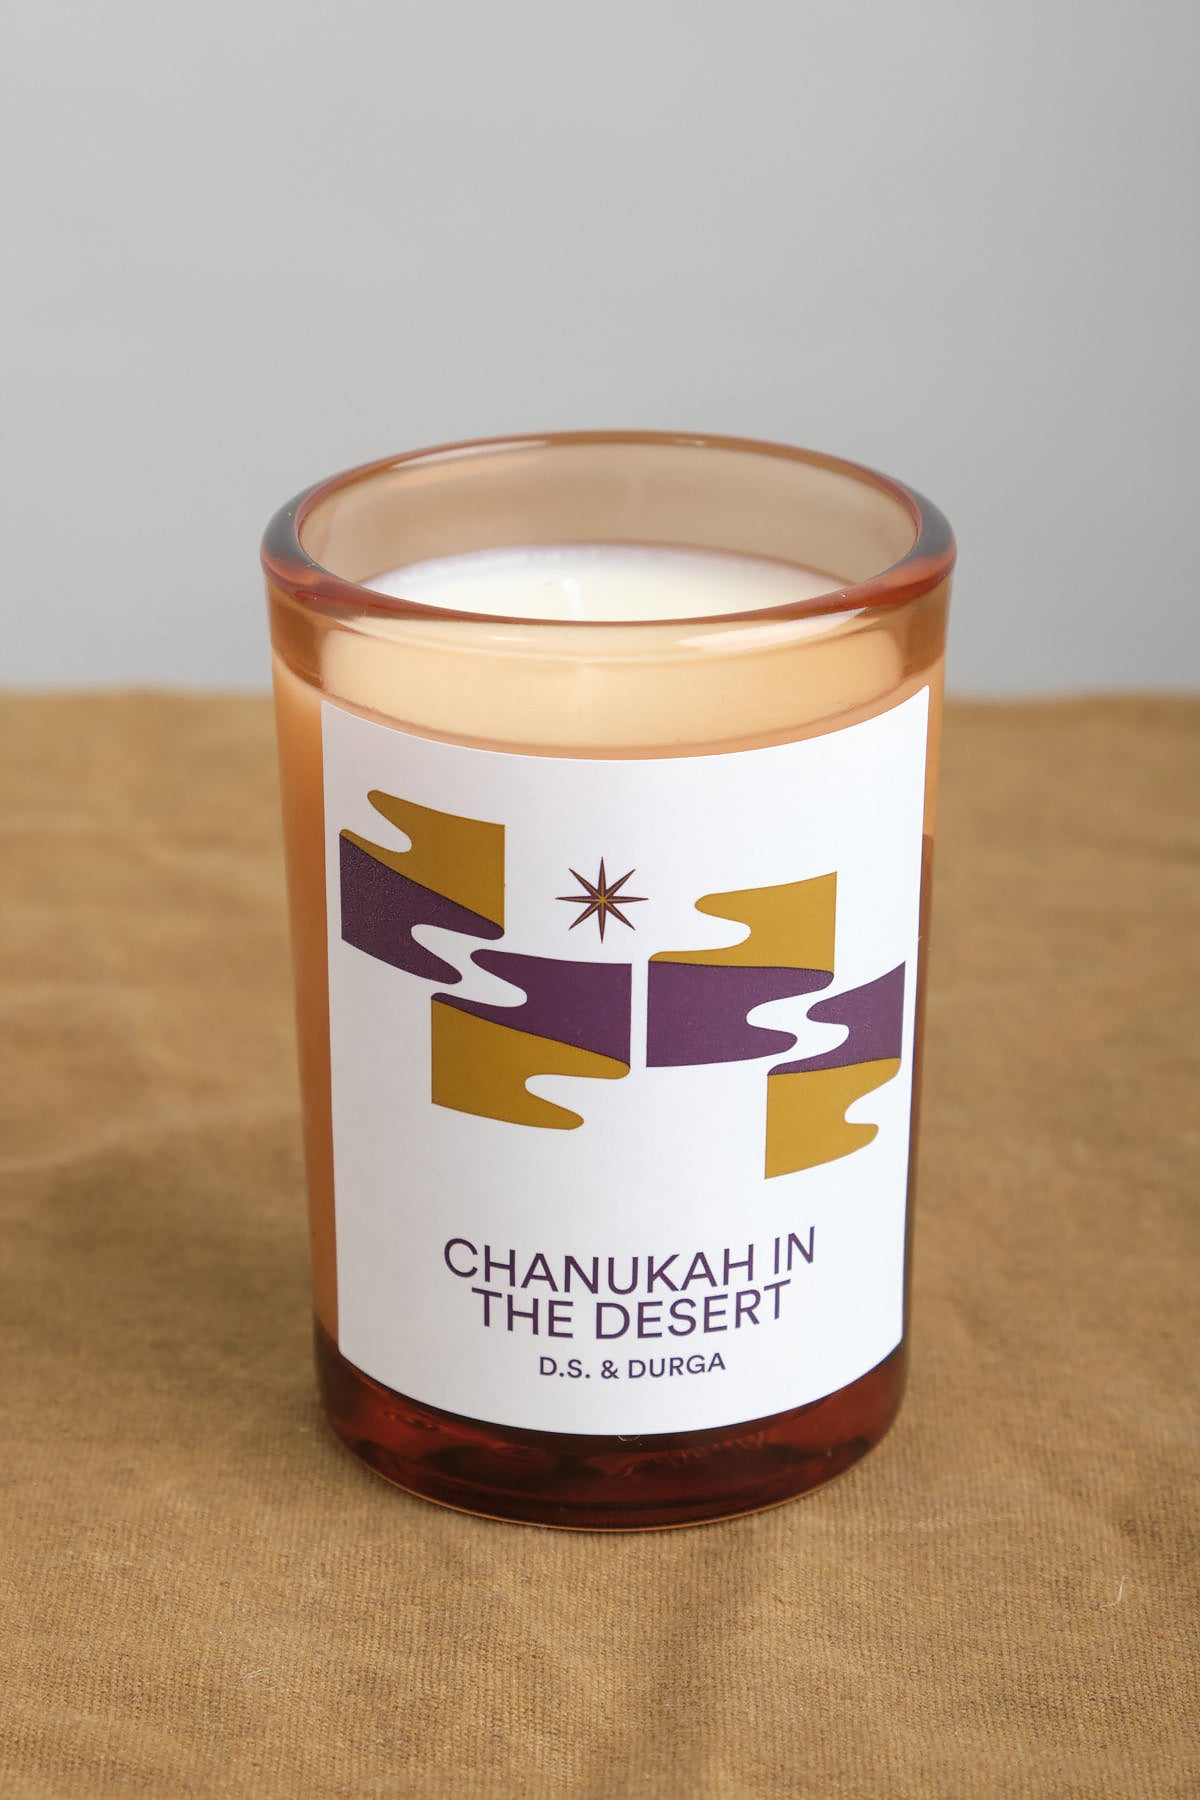 Chanukah in the Desert Candle